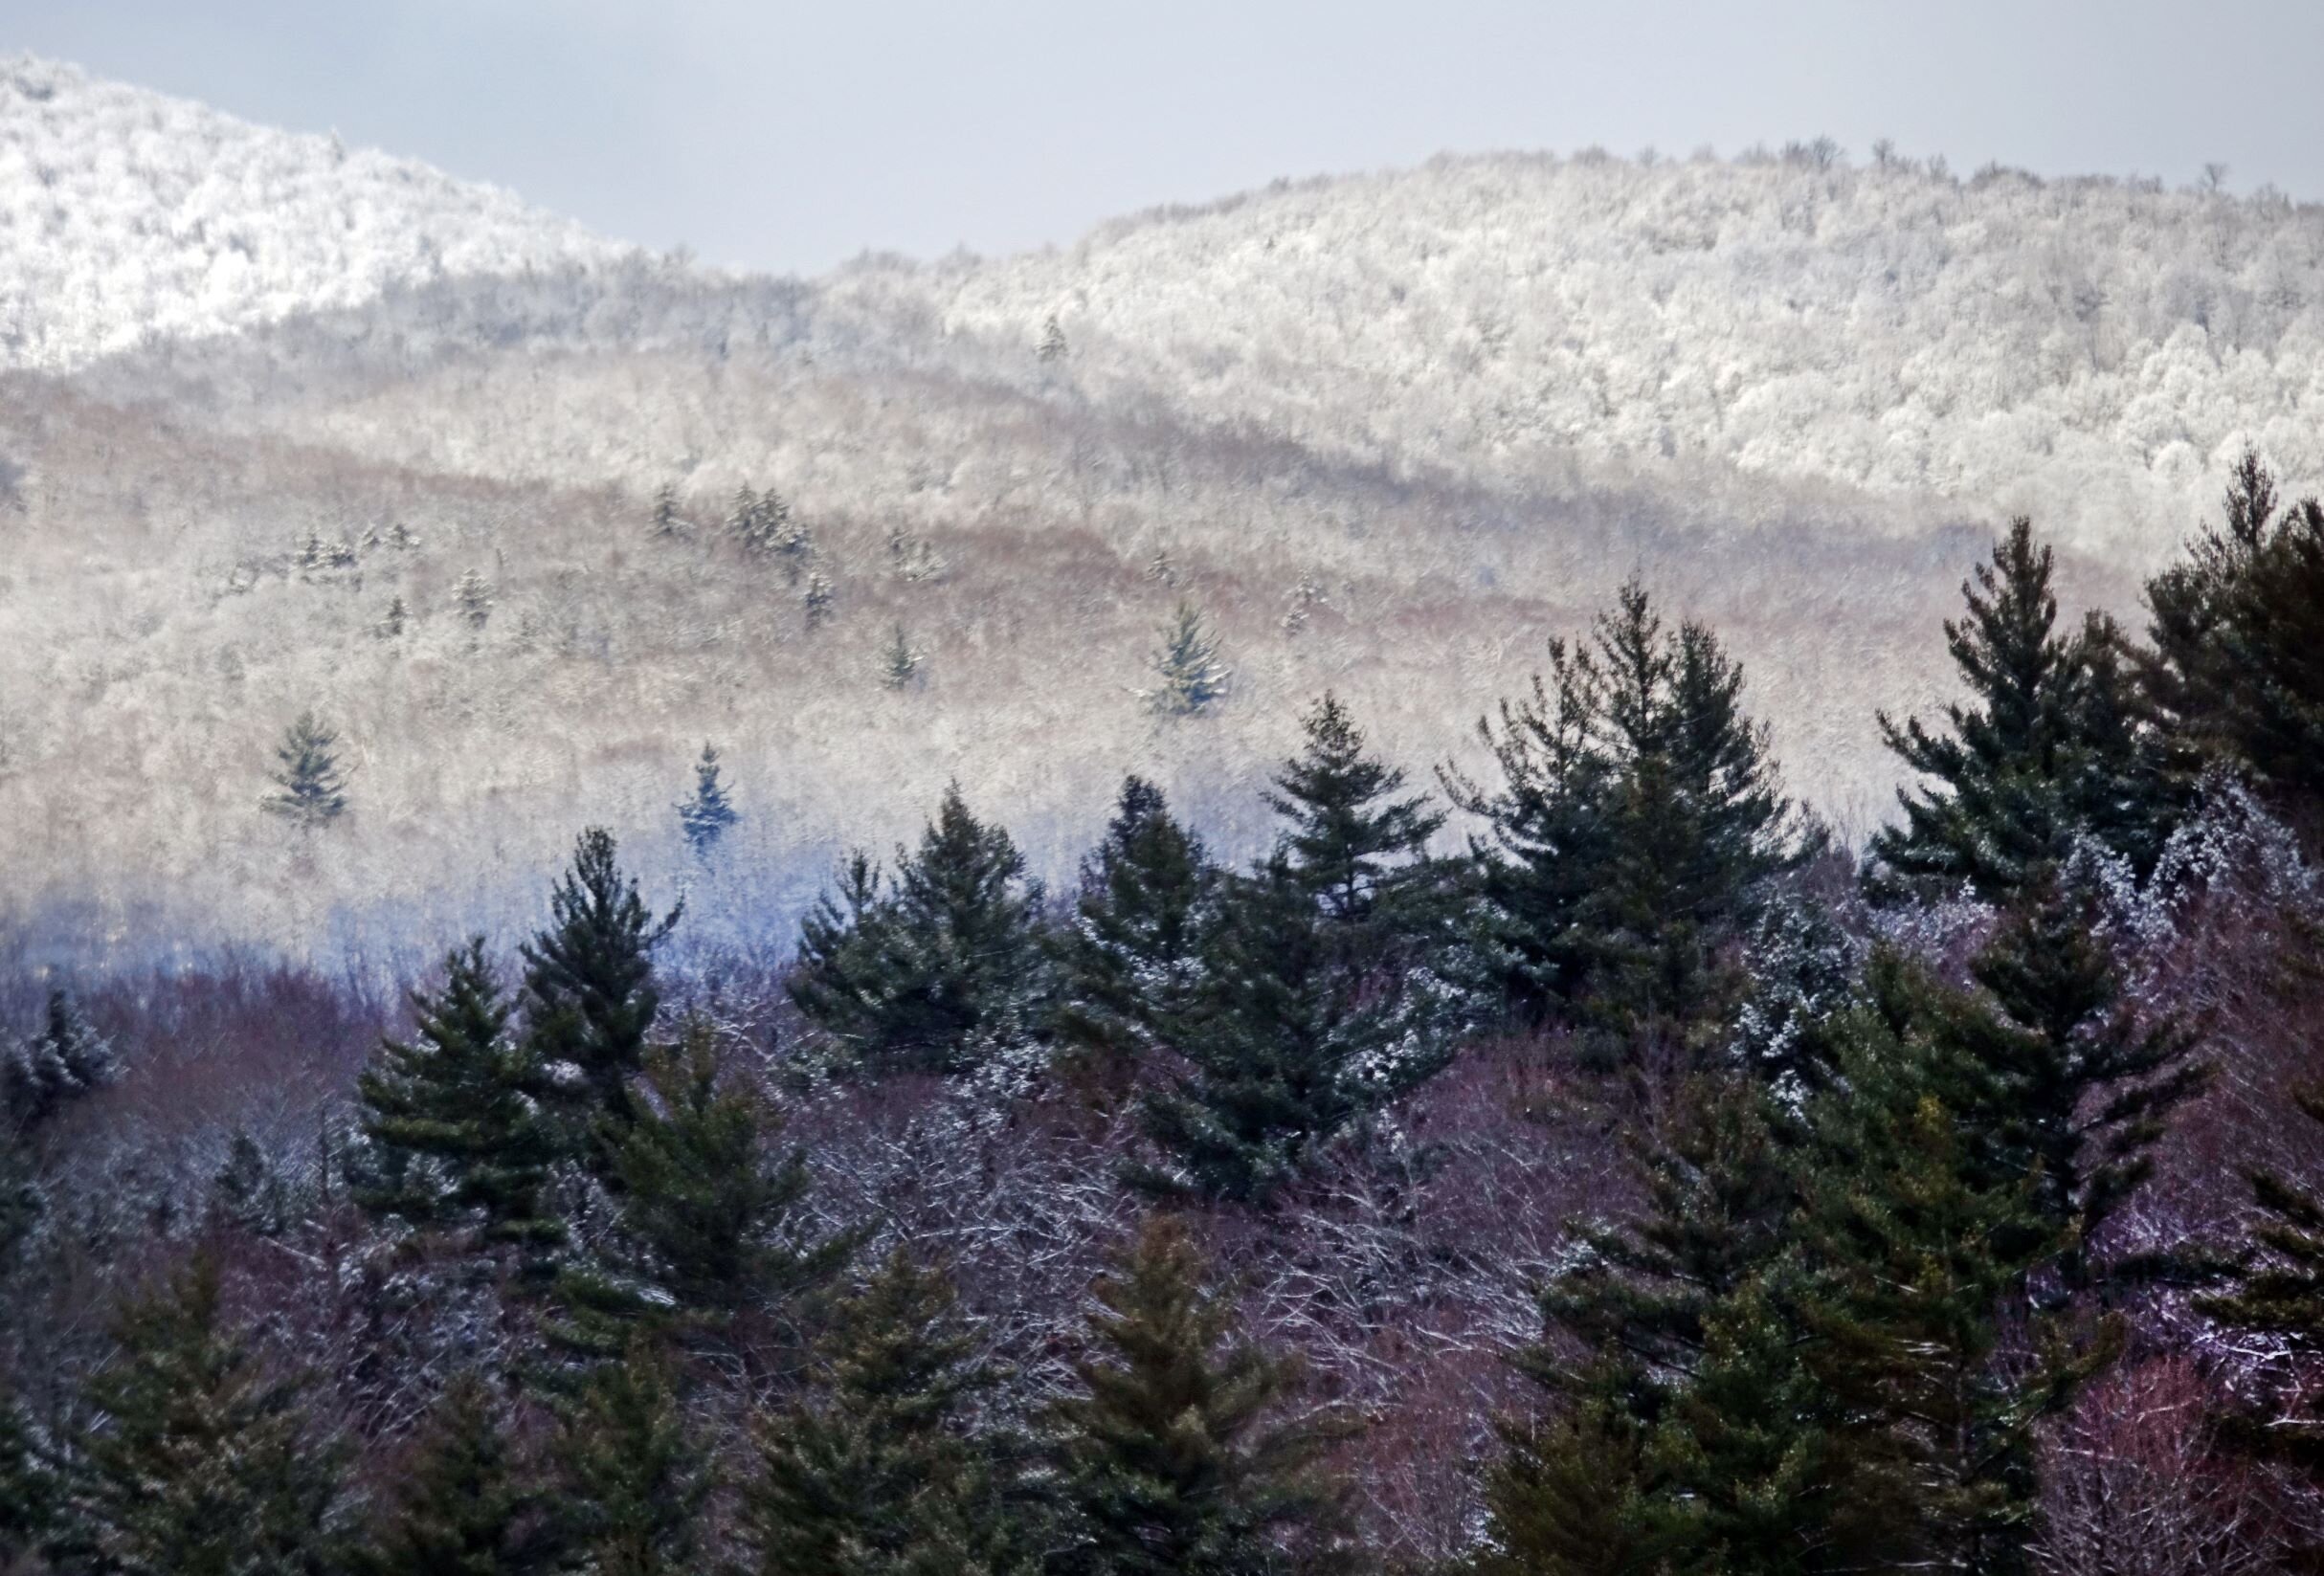   Snow in the foothills toward Bolton makes the pine trees pop. Photo by Gordon Miller.   